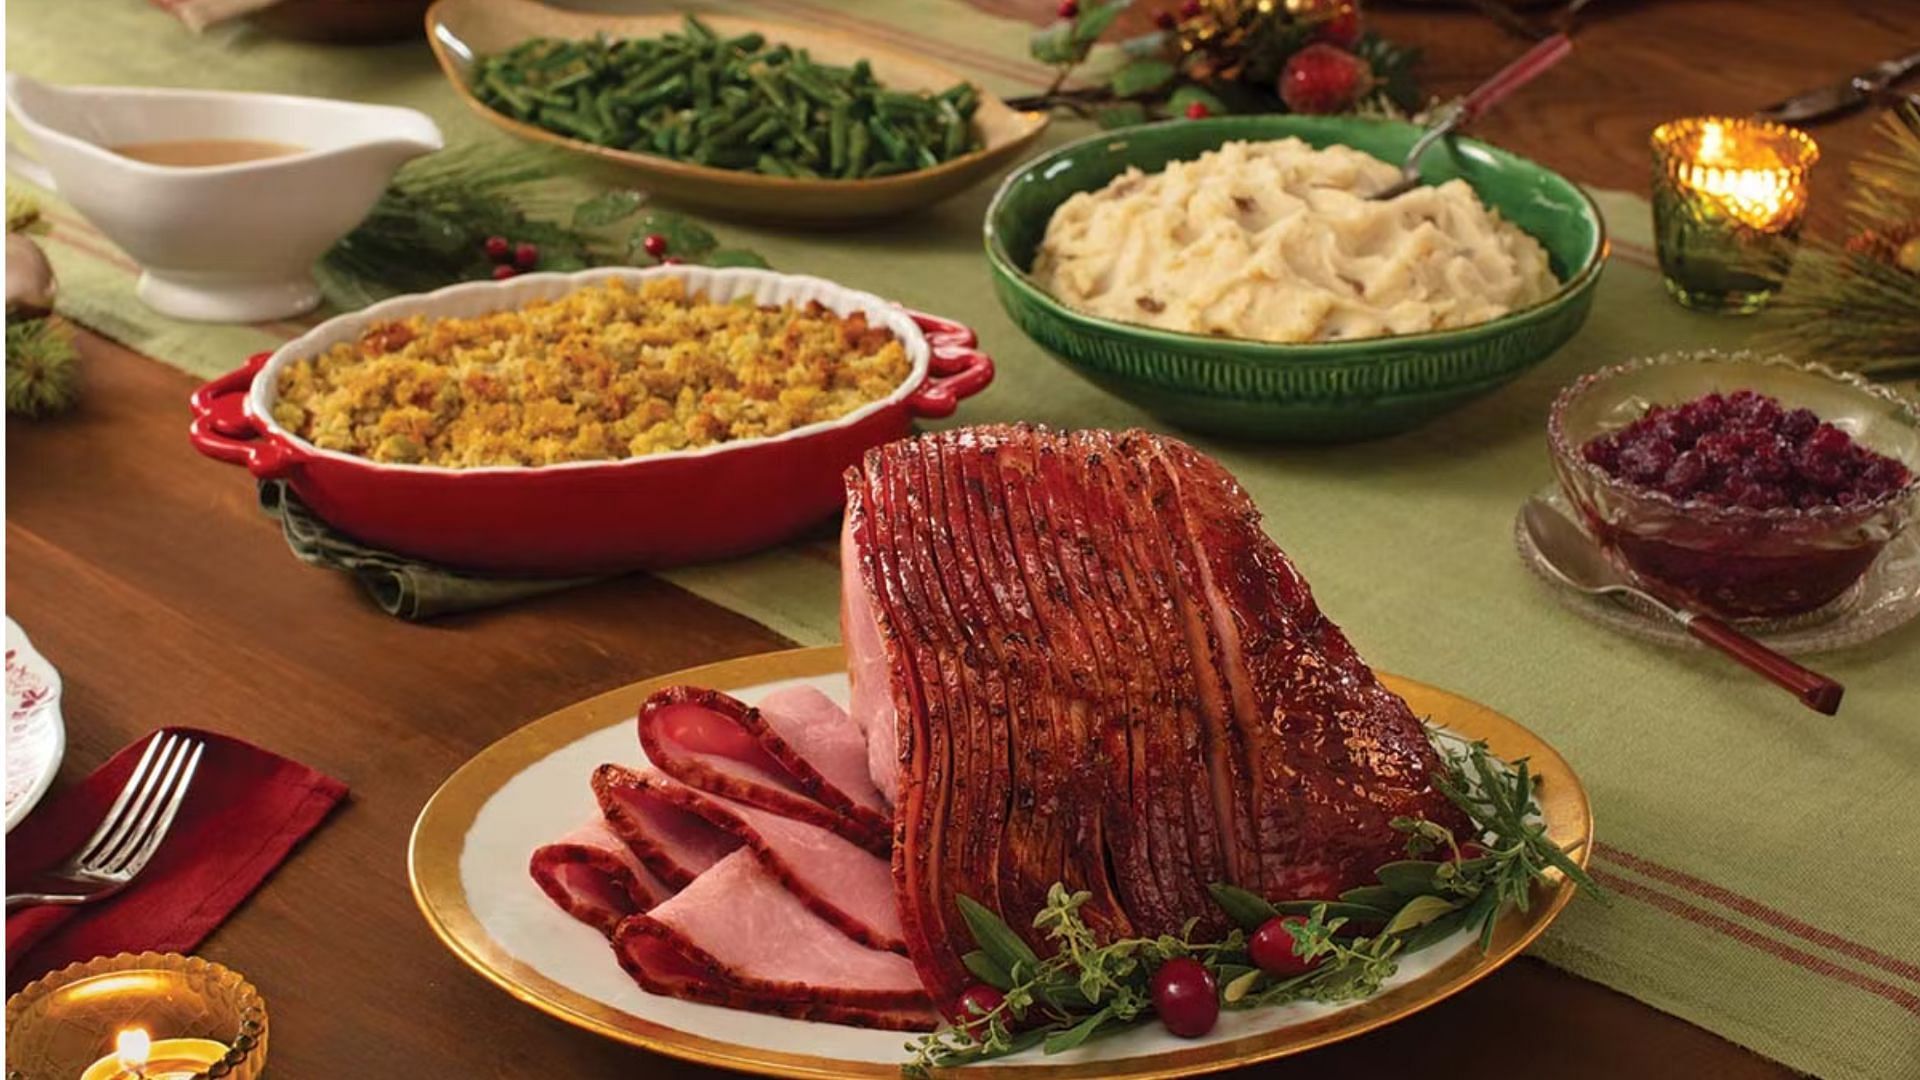 feed up to 10 people with the Holiday Ham Heat n&rsquo; Serve Family Dinner (Image via Cracker Barrel)